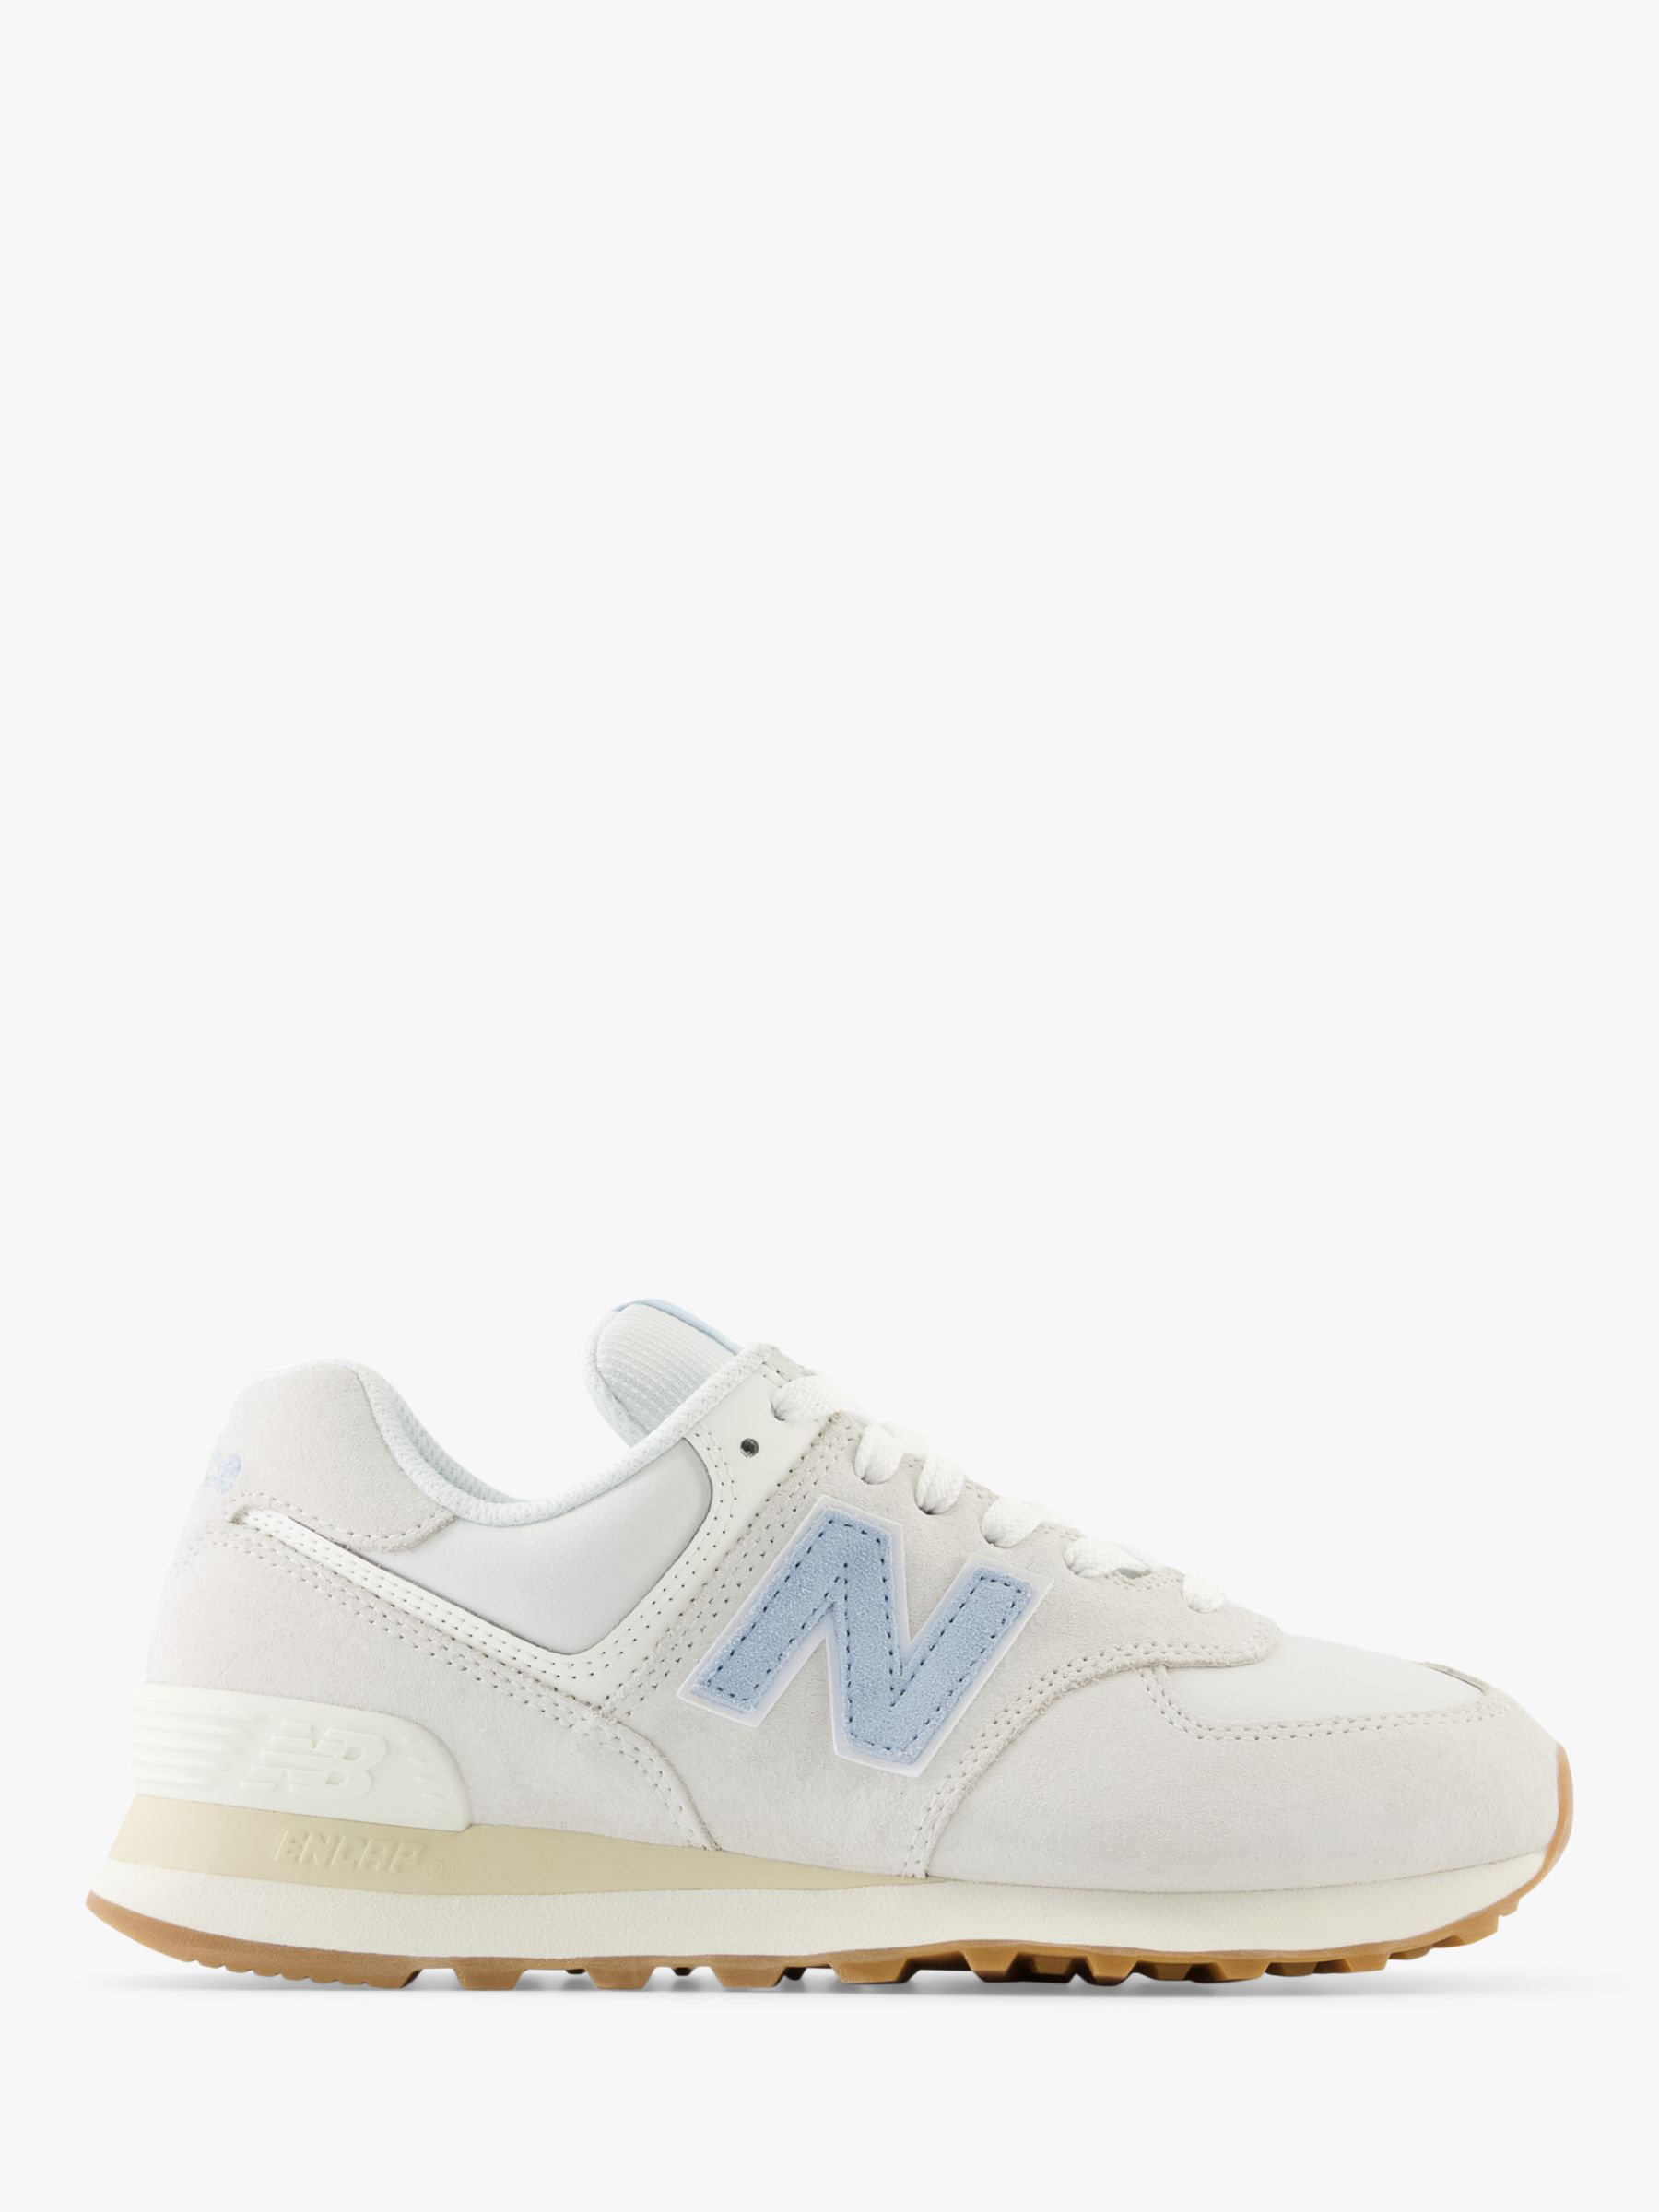 New Balance 574 Suede Mesh Trainers, Reflection at John Lewis & Partners